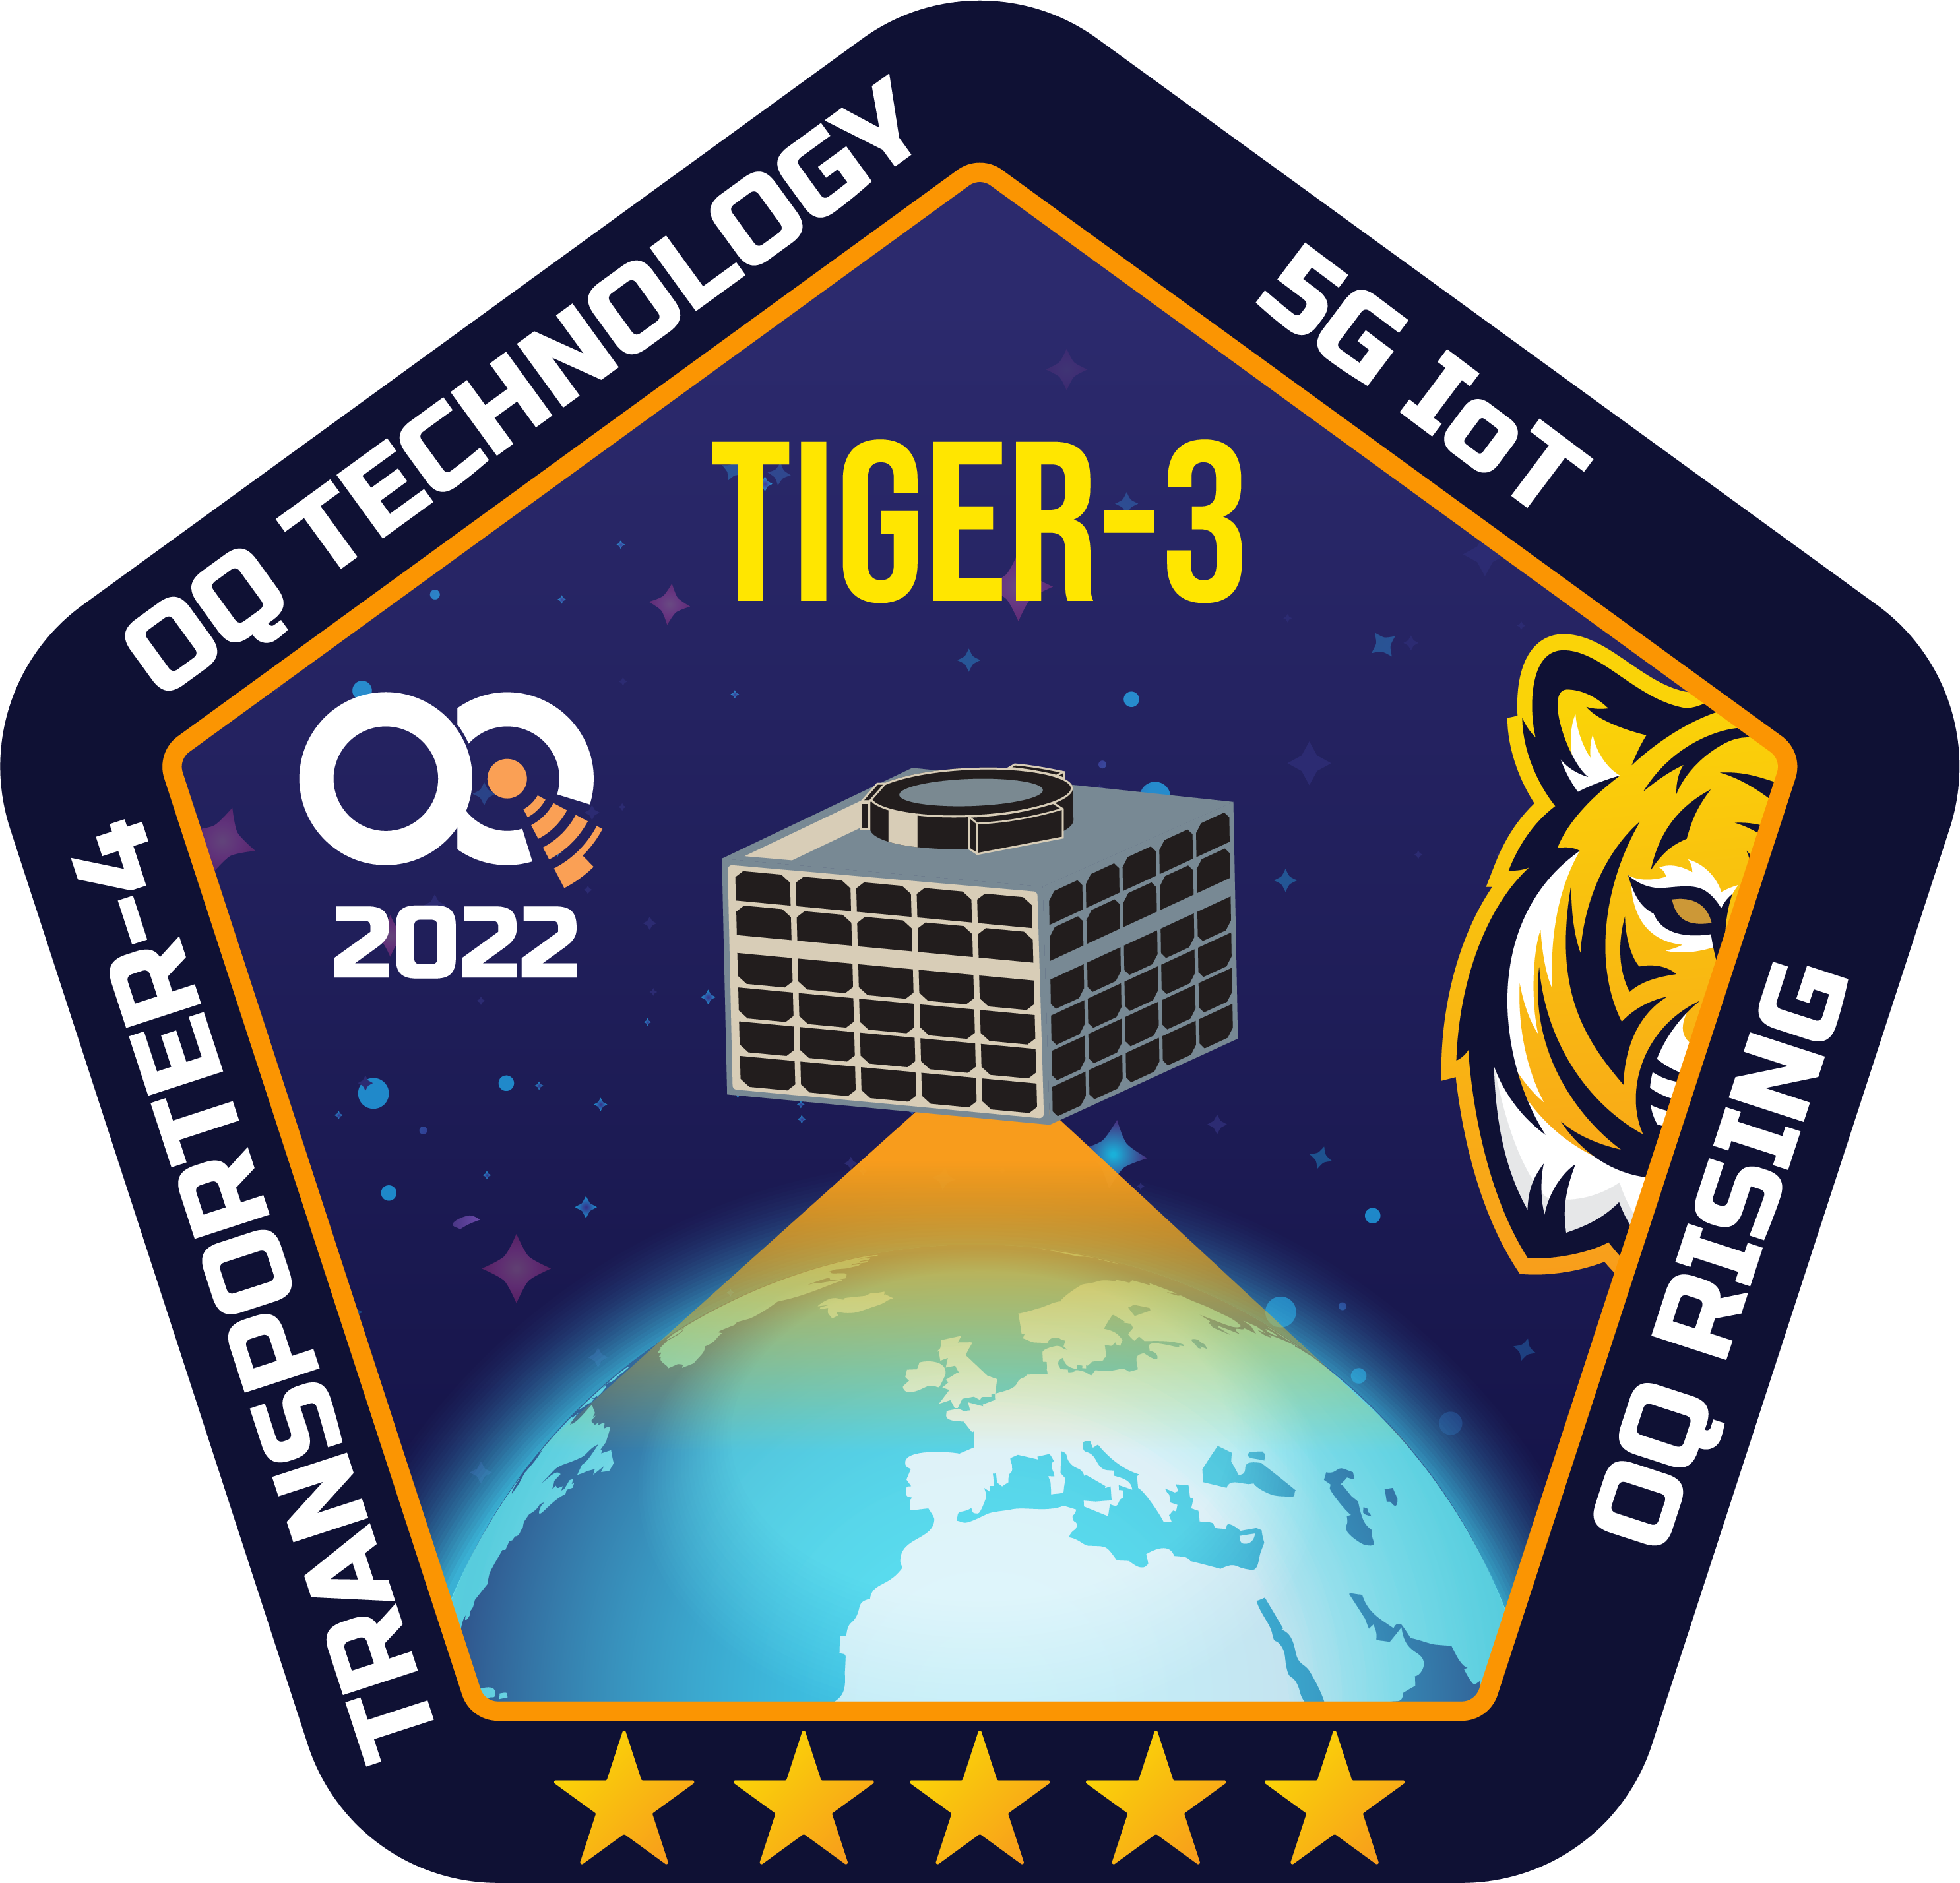 Tiger-3 mission patch